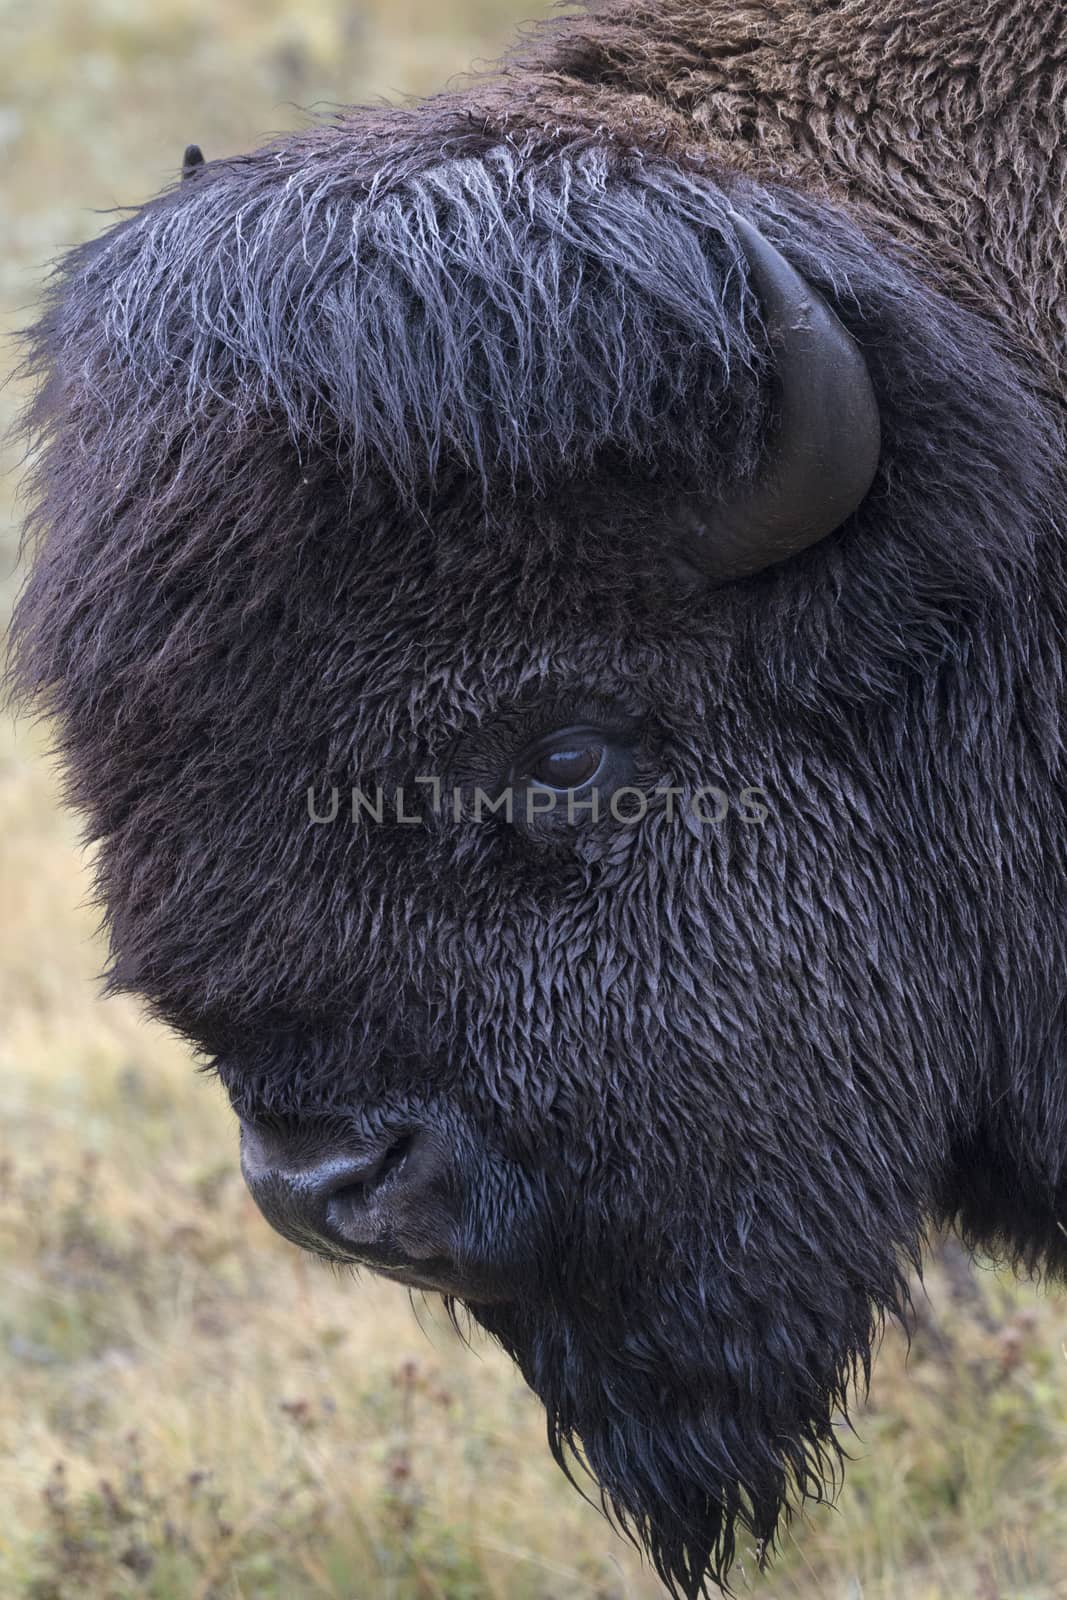 Bison head portrait with green grass background.  Location is the Bison Paddock autodrive of Waterton National Park in Alberta, Canada.  Date is September 11, 2016.  